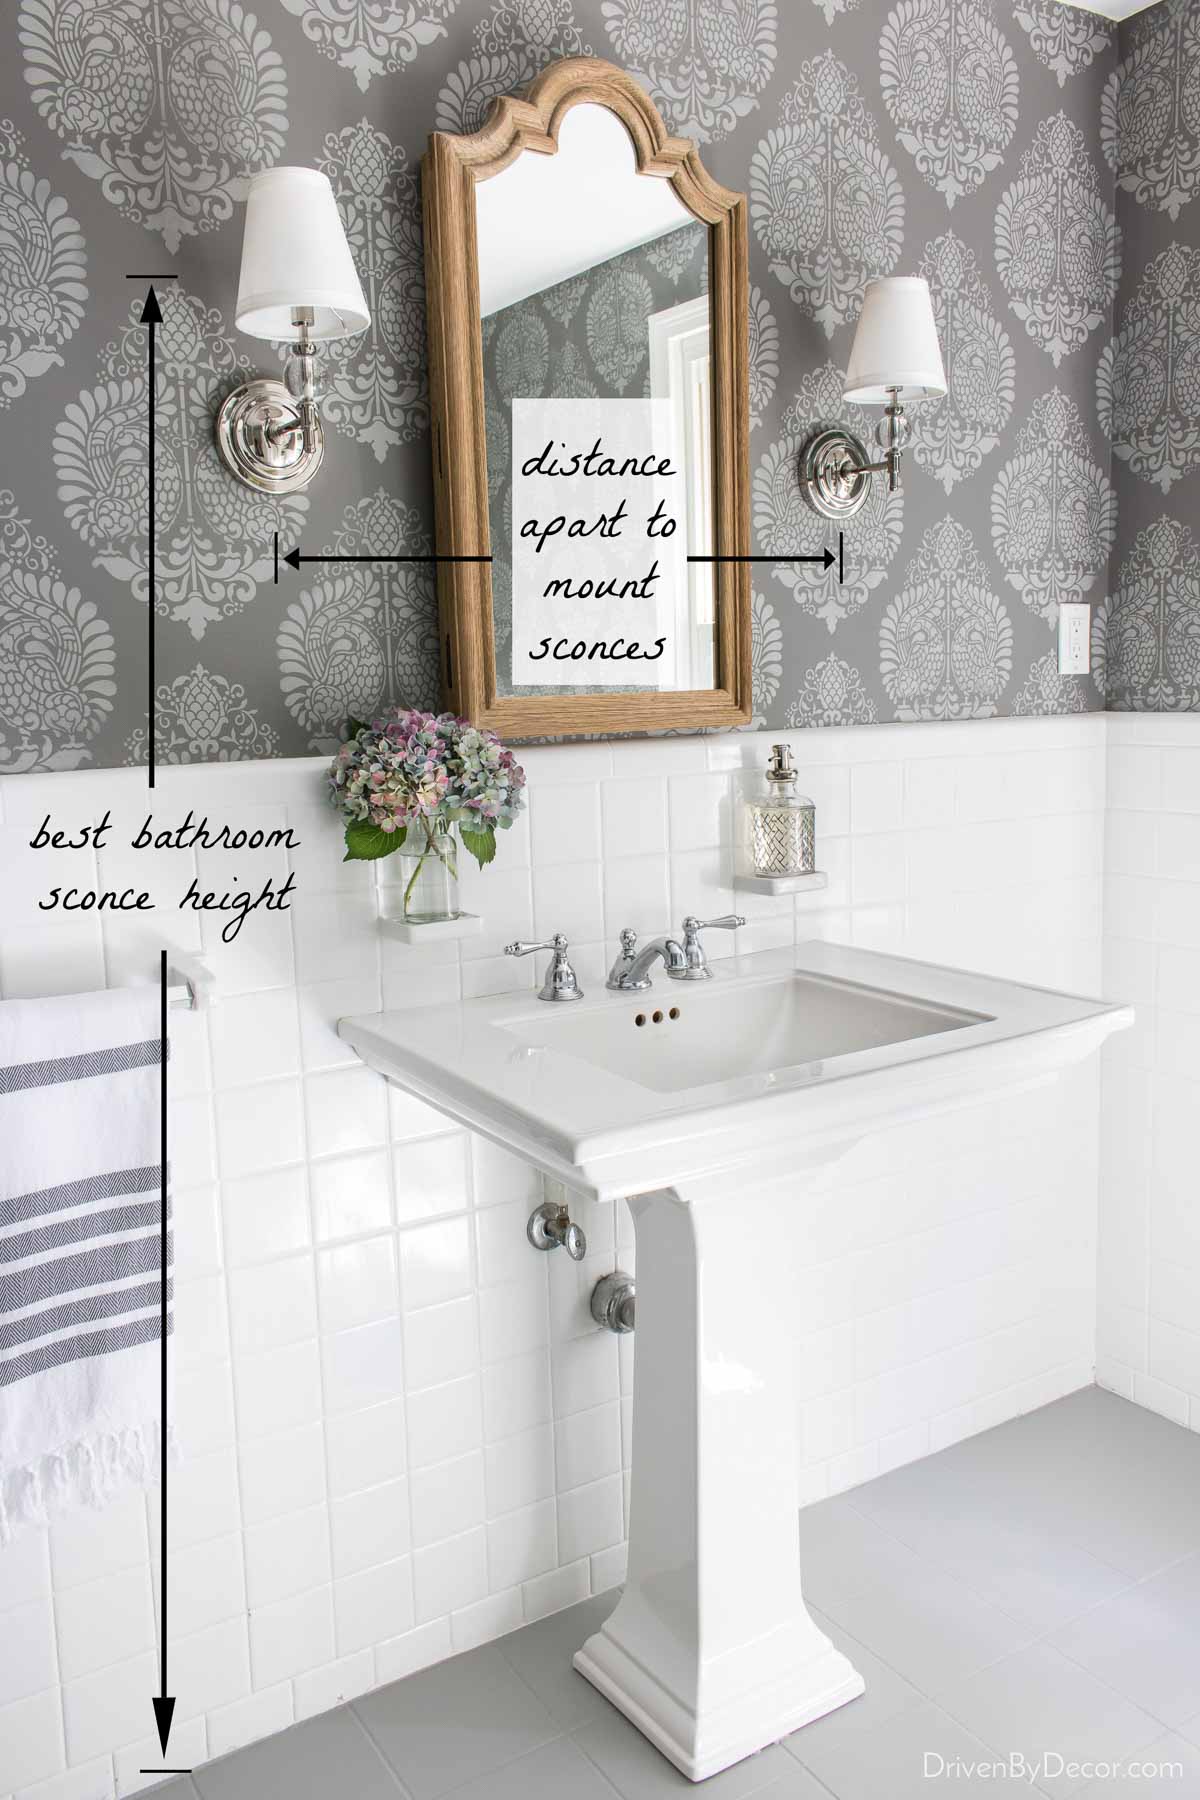 Shows the best bathroom sconce height with two sconces flanking a mirror